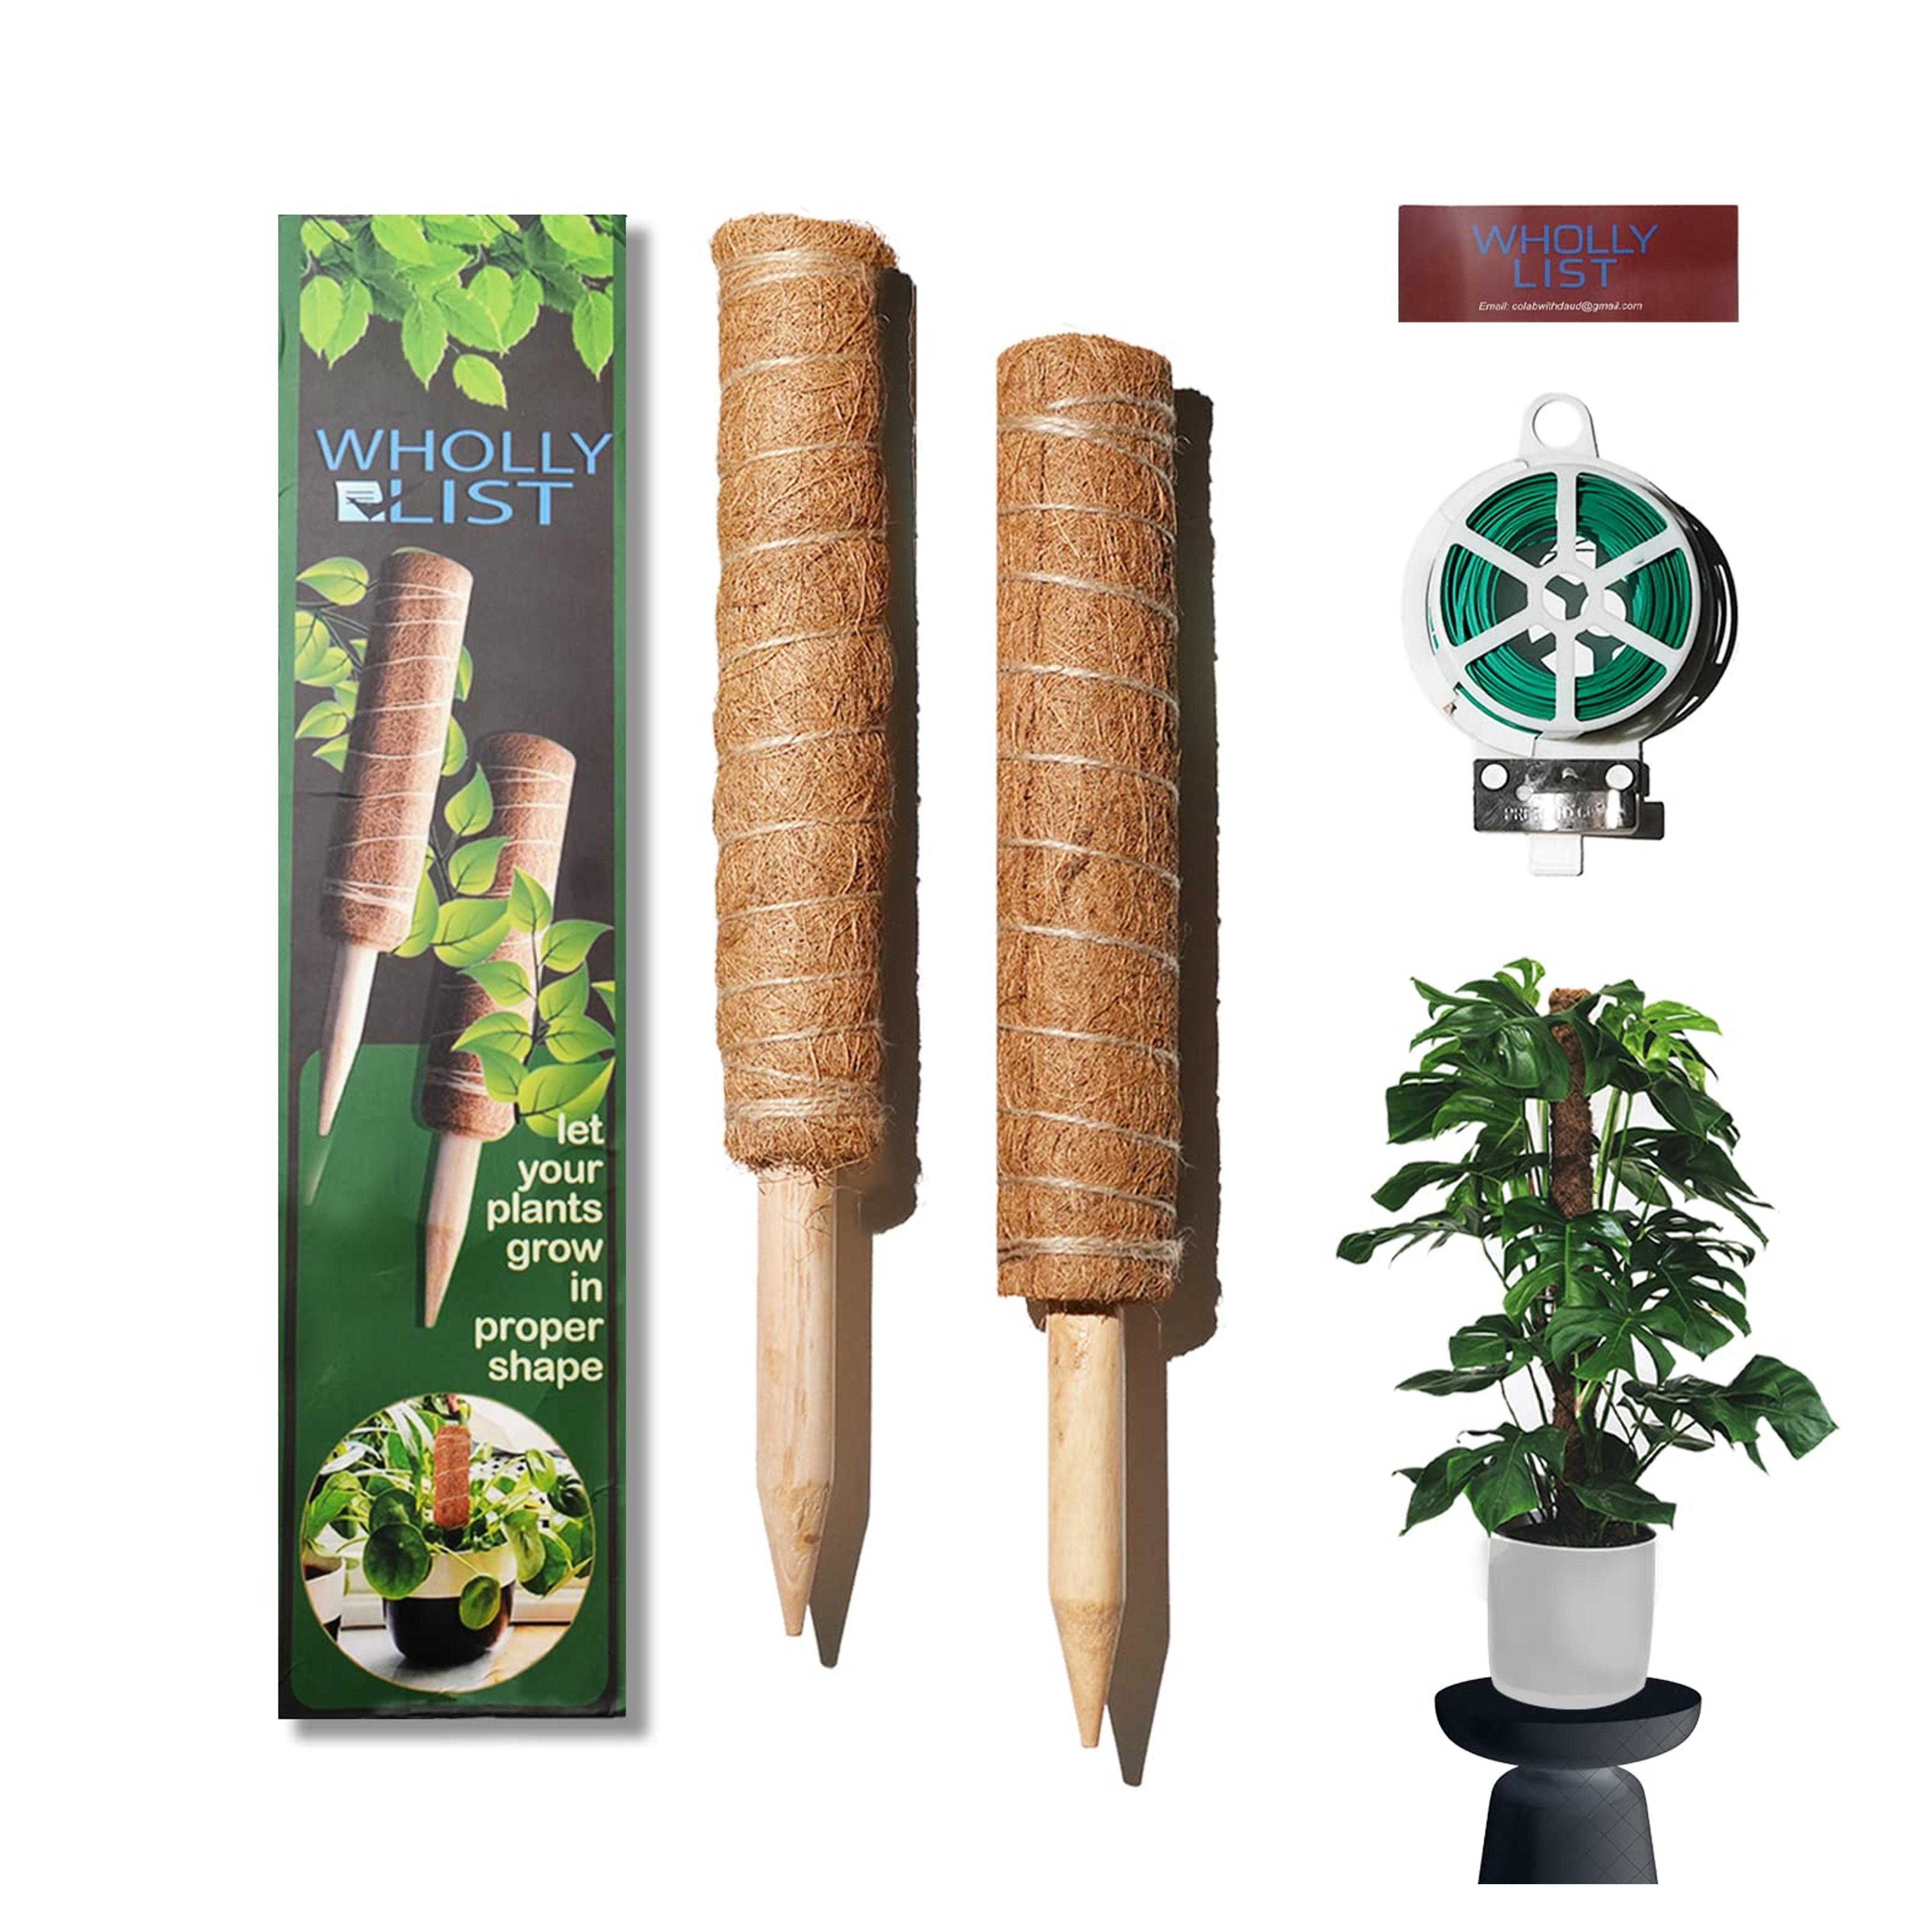 WHOLLY LIST Moss Pole for Plant Monstera, 2-Pack 27.5-inches Moss Poles for Climbing Plants with 20m Garden Twist tie, Coco Coir Totem Stakes for Plant Support to Grow Upwards